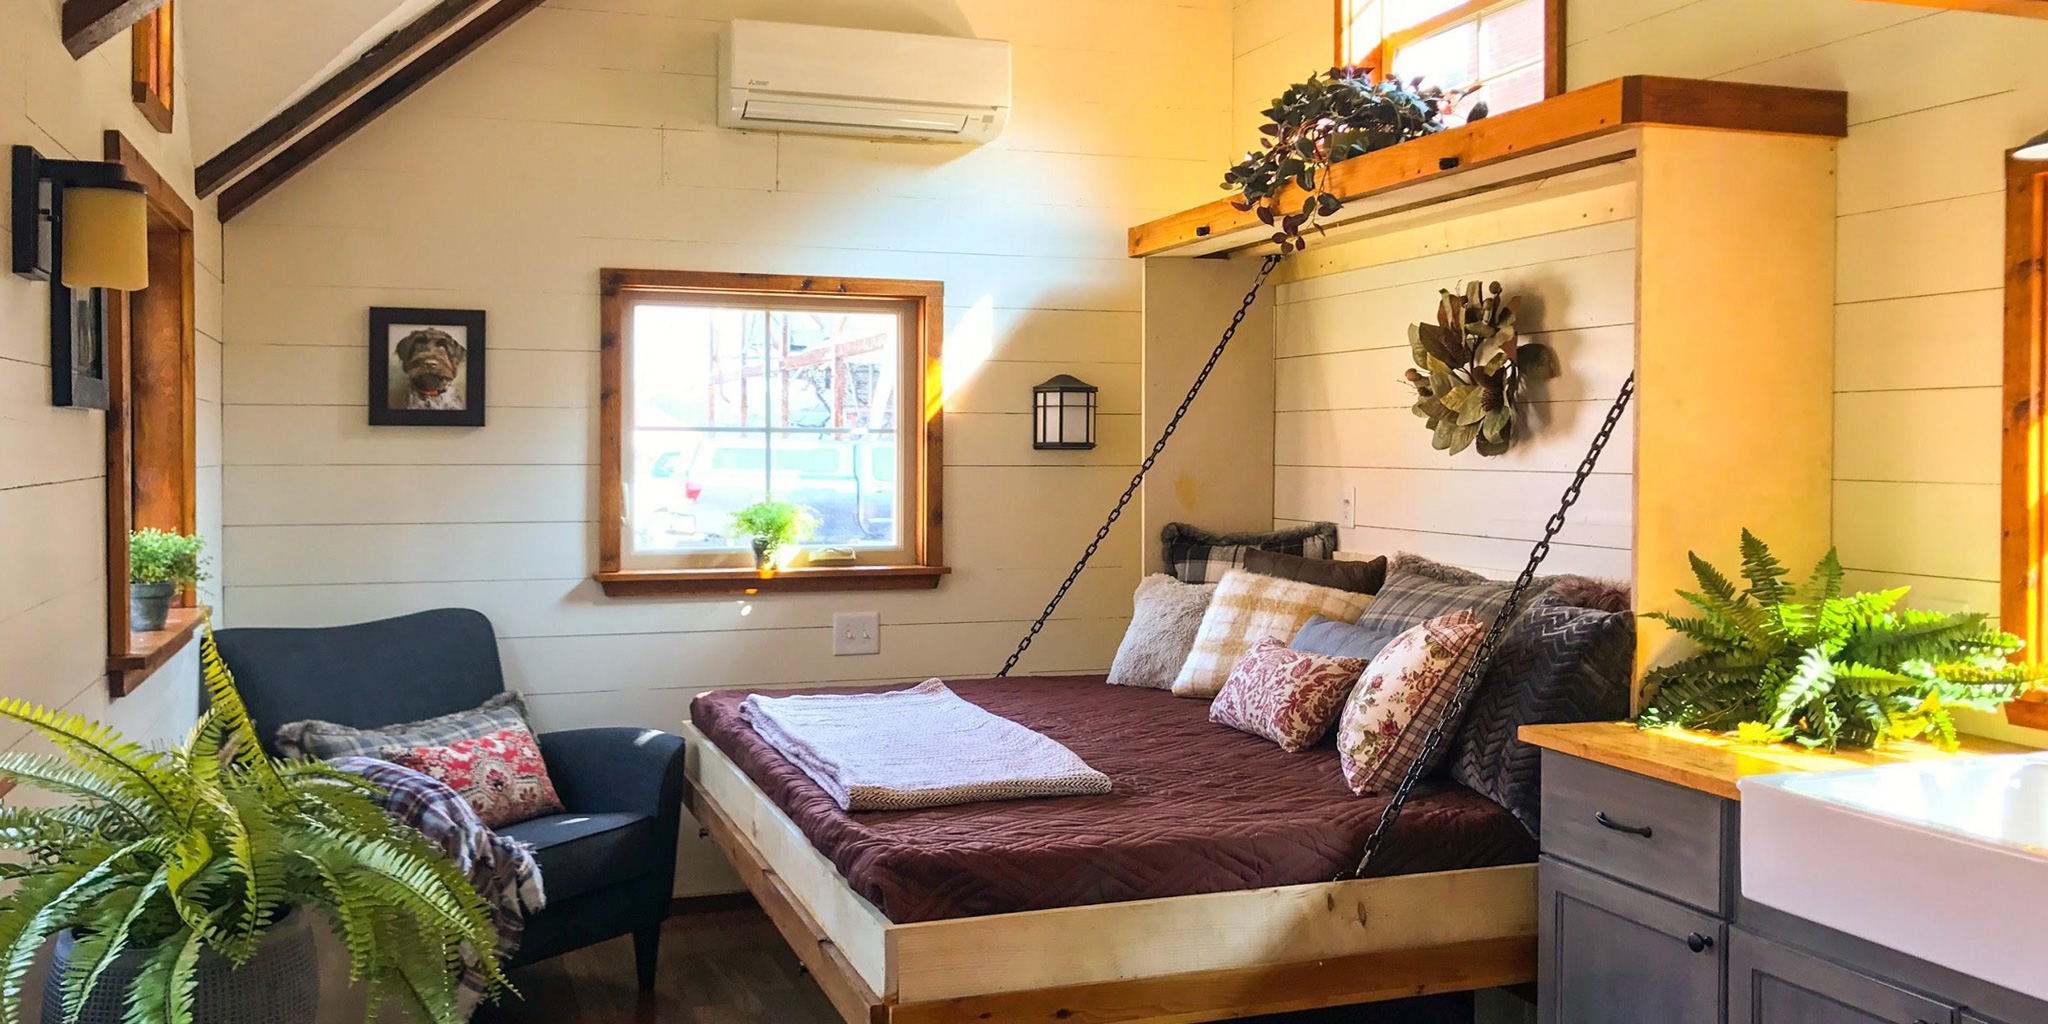 The Exhaustive Guide to Heating and Cooling Your Tiny Home - PTAC Units Blog